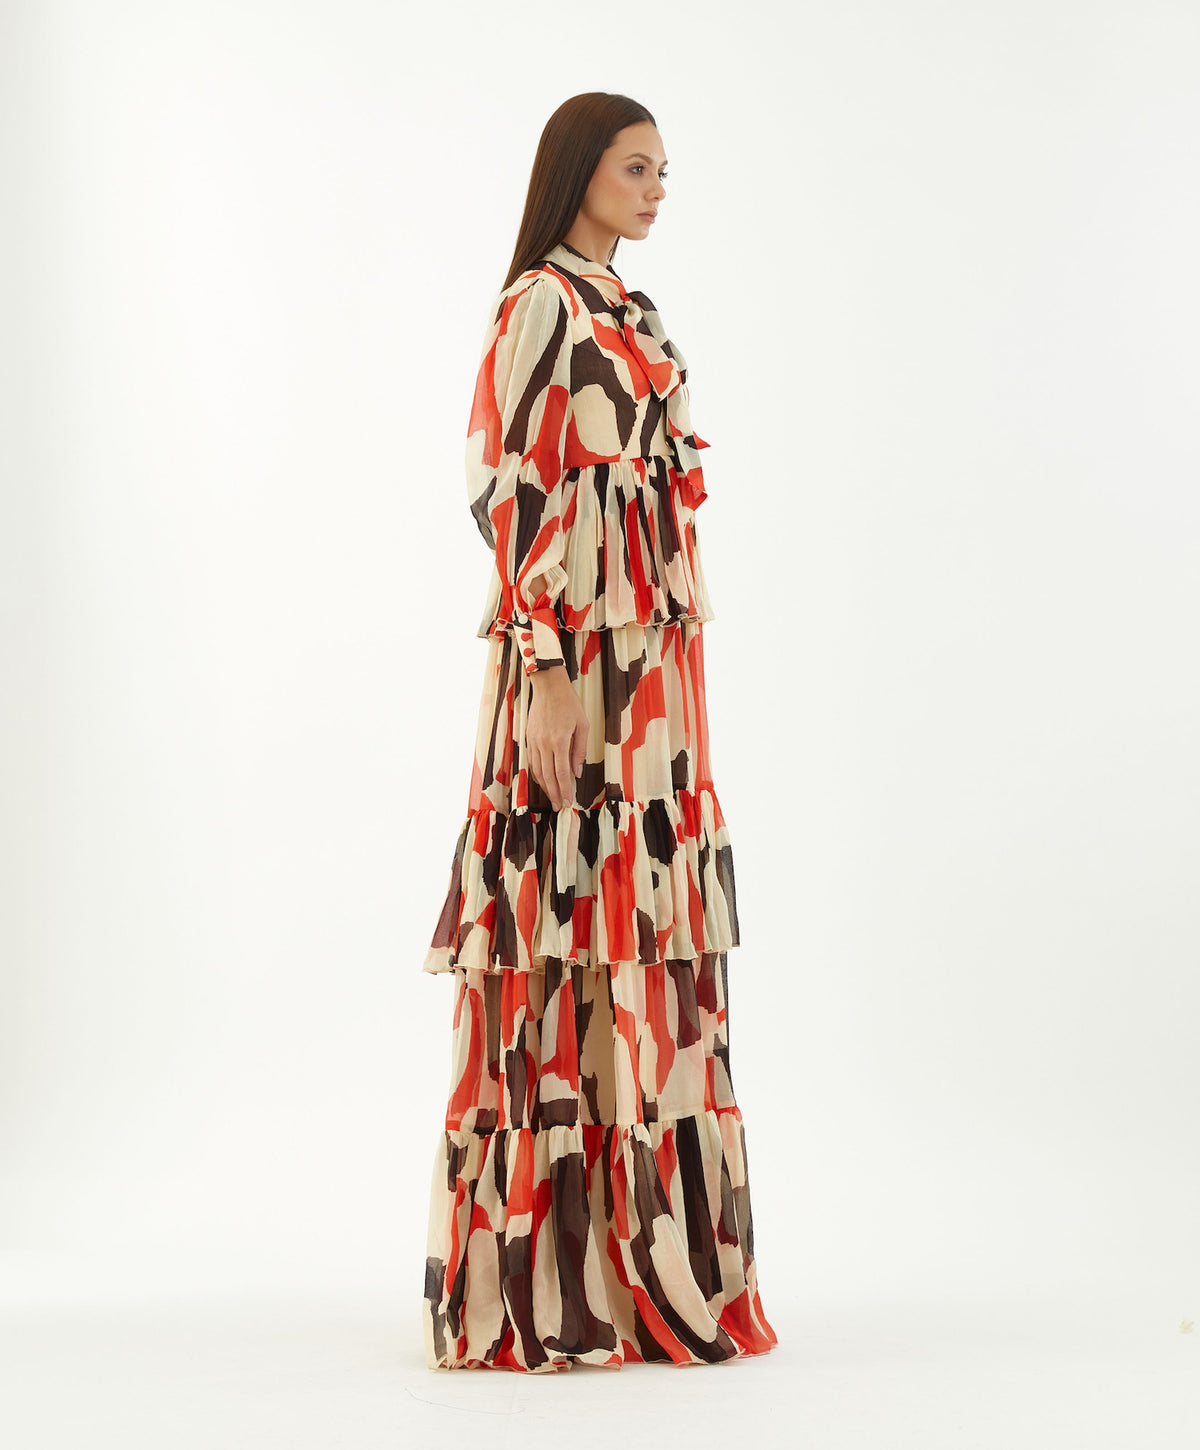 OFFWHITE, RED AND BLACK ABSTRACT FRILL DRESS